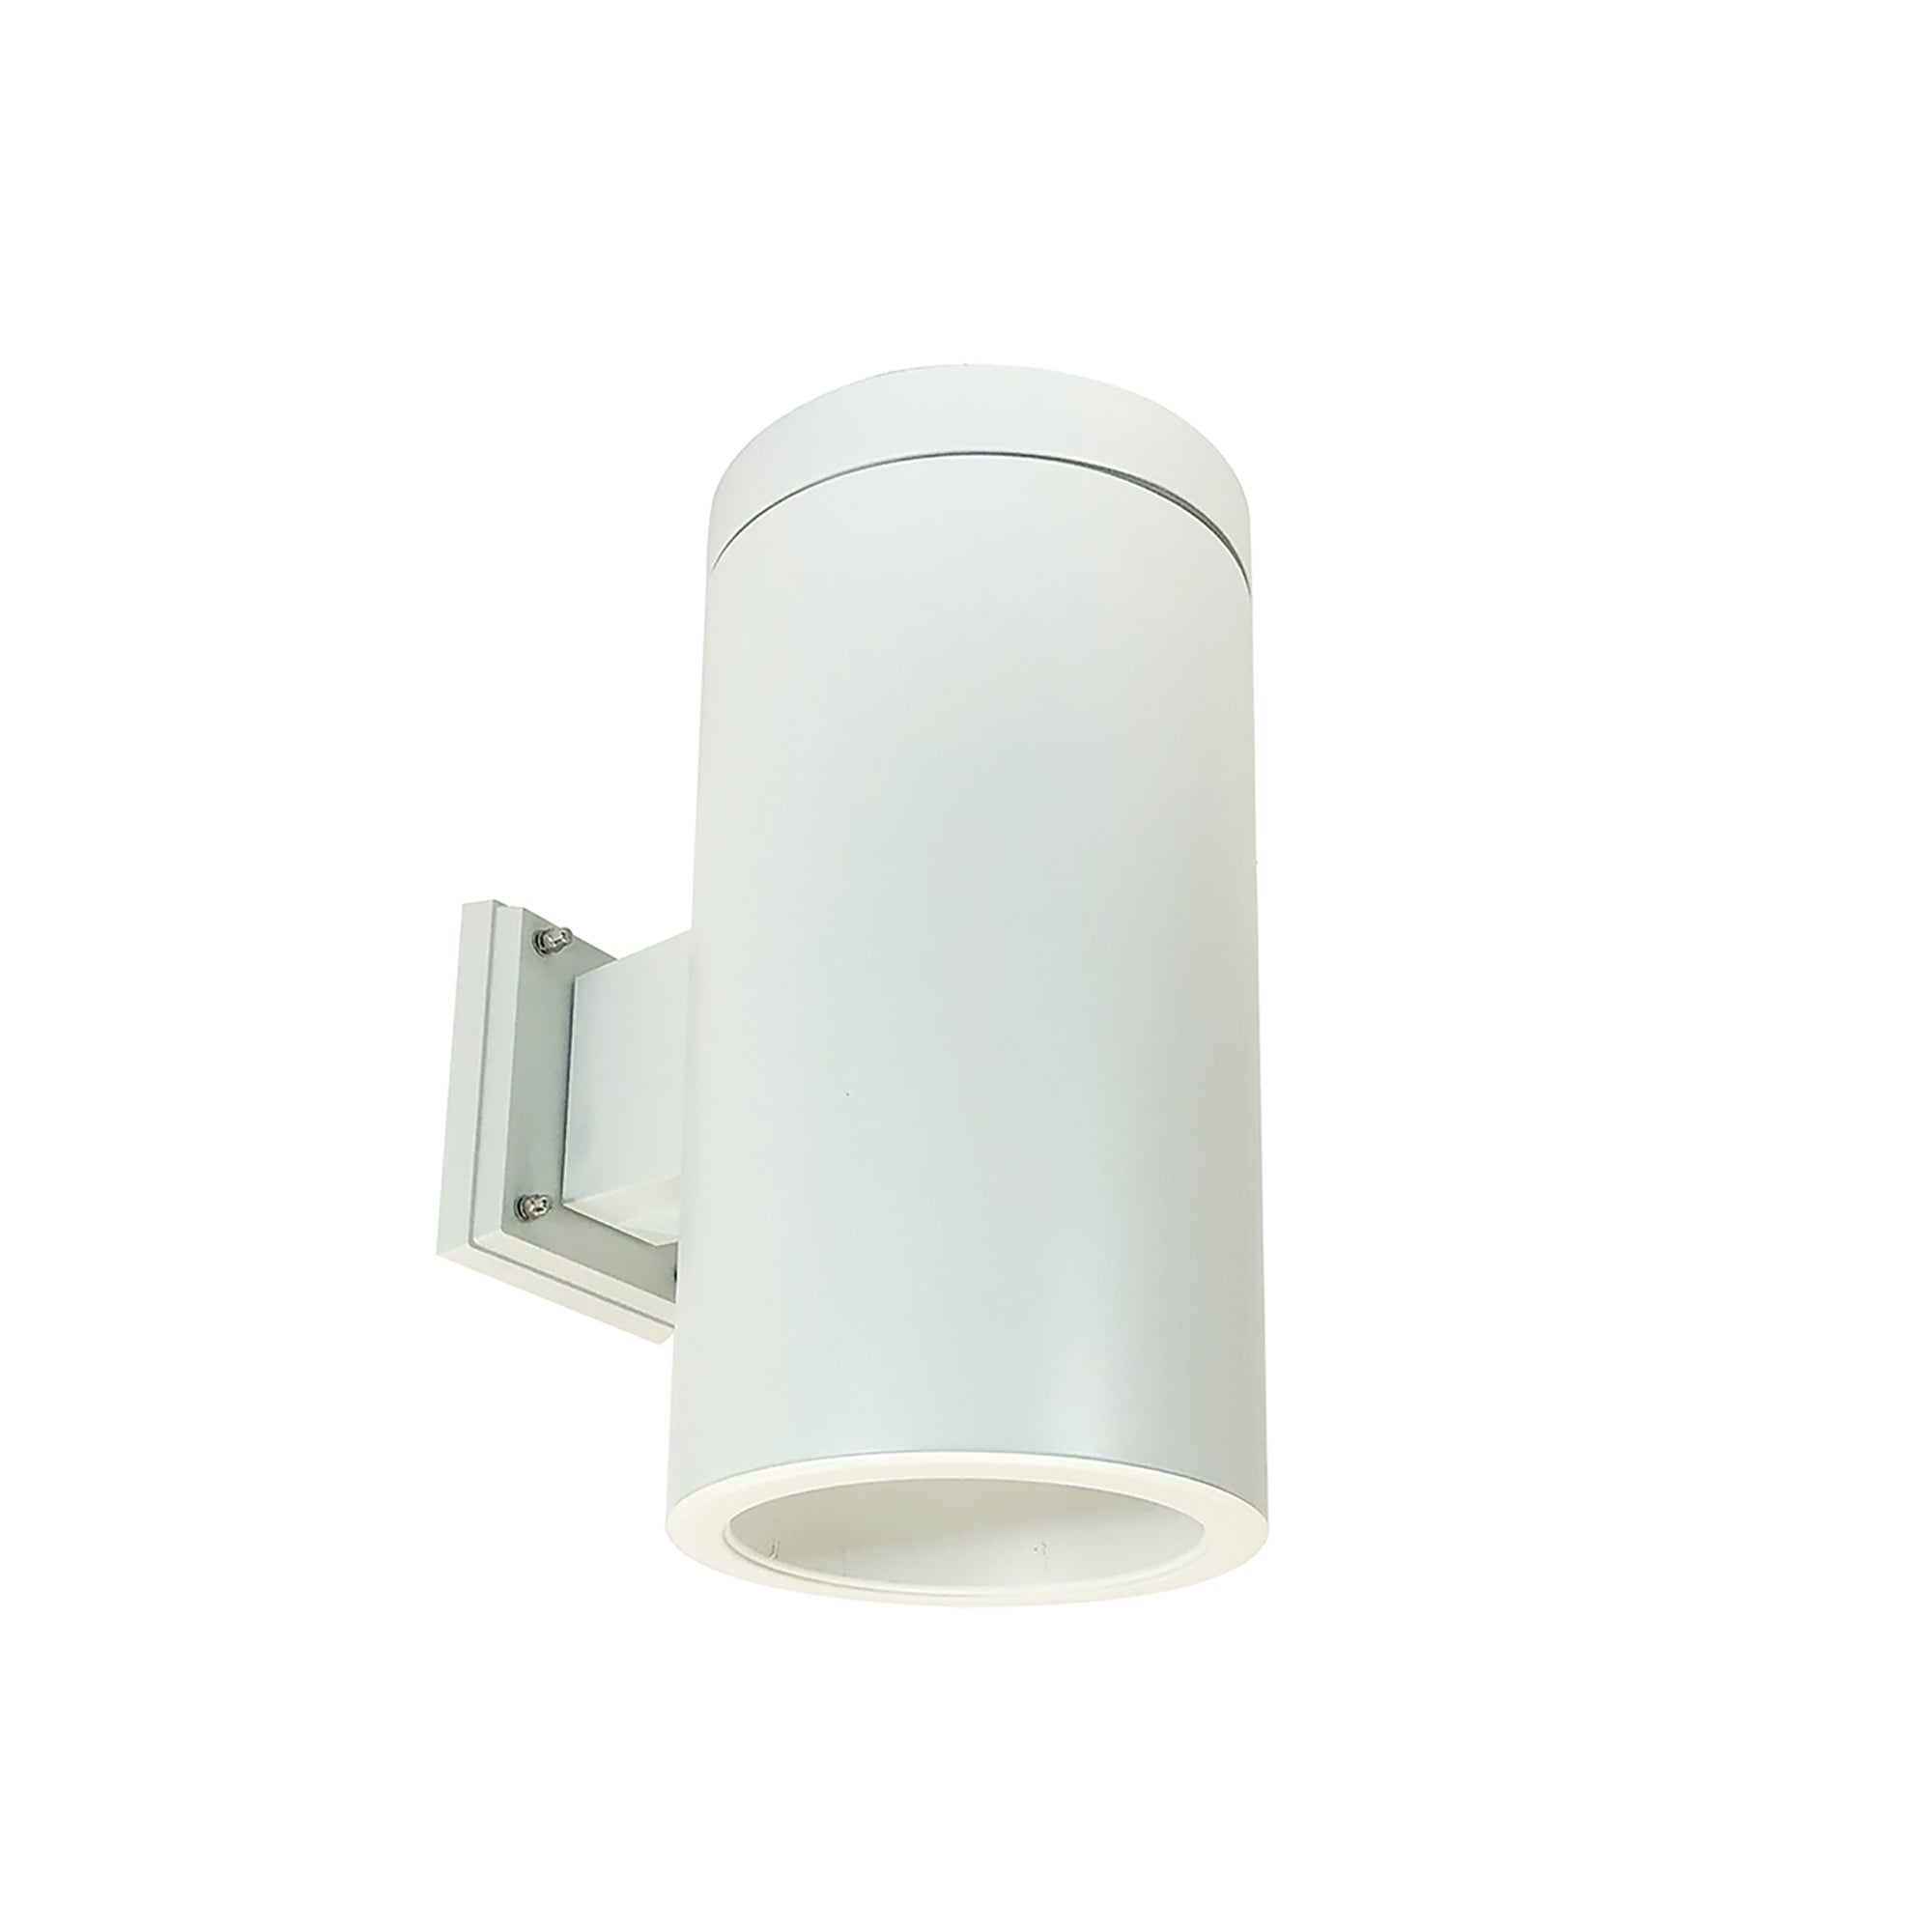 Nora Lighting NYLS2-6W15130FWWW6 - Cylinder - 6 Inch CYL WALL MNT 1500L 30K REF. FLD. WH/WH FLANGE 120-277V WH CYL